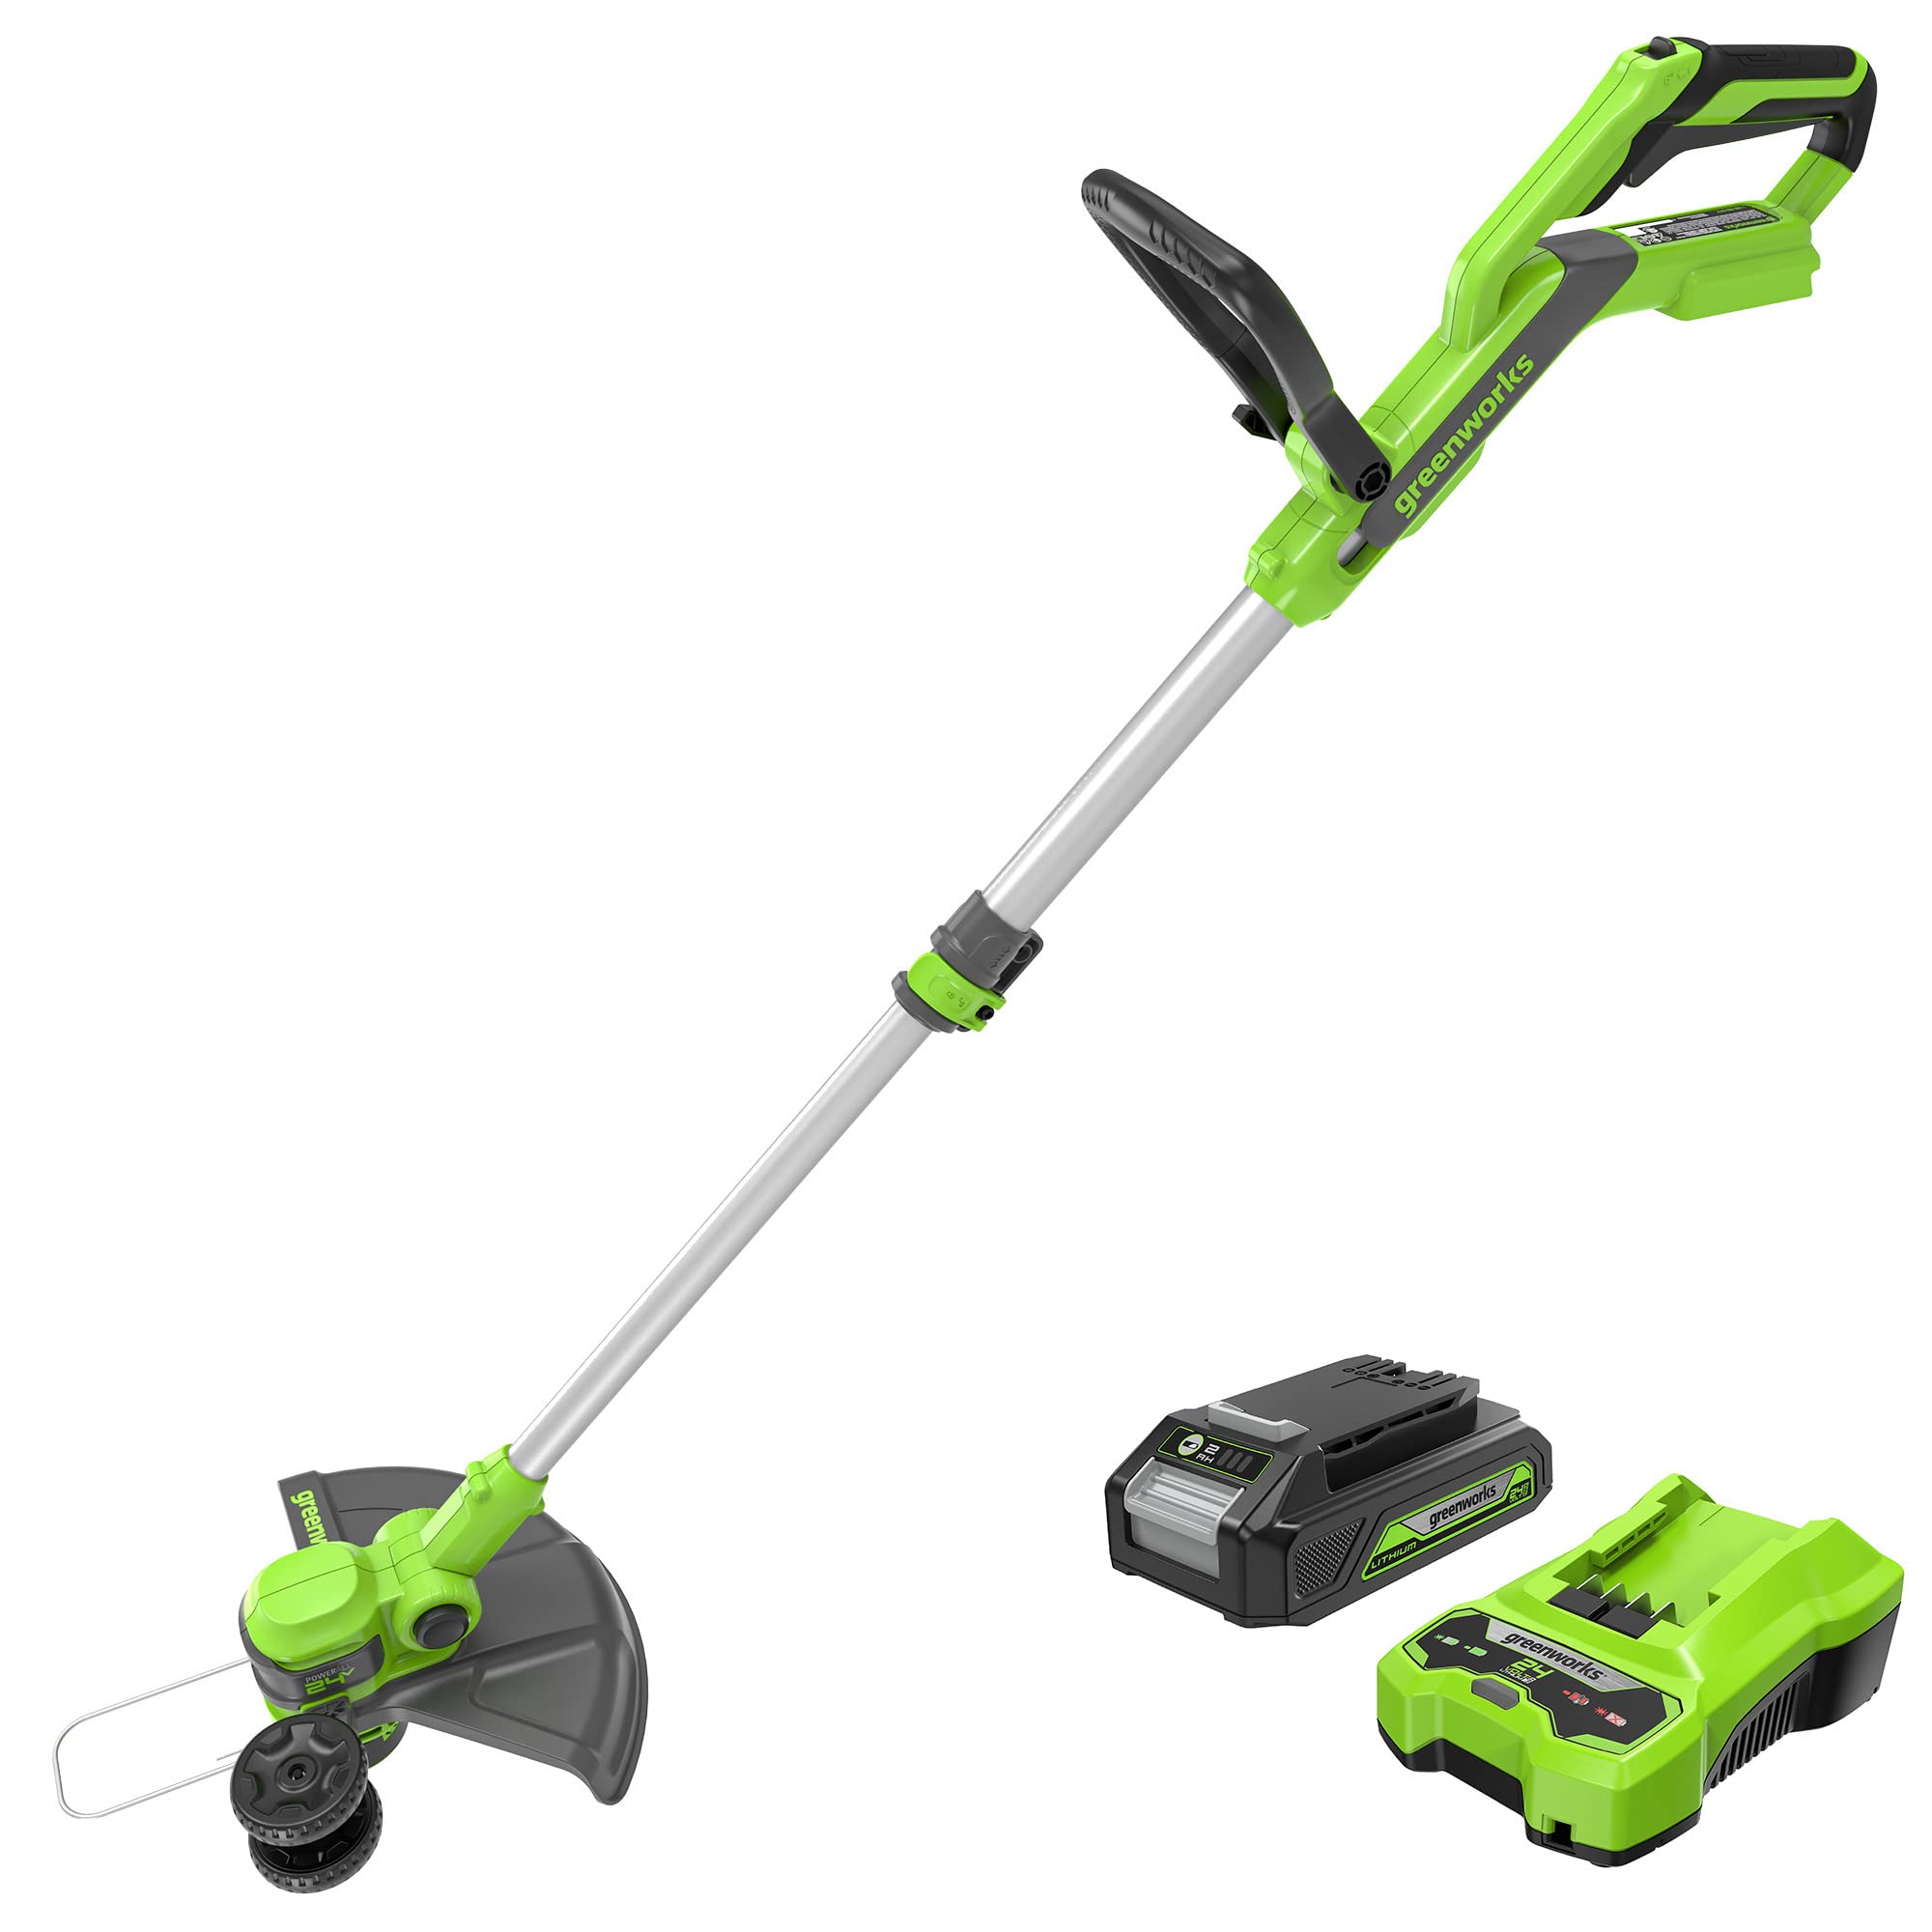 Greenworks 24V 12-Inch Cordless String Trimmer/Edger (Gen 2), 2.0Ah USB Battery and Charger Included $60